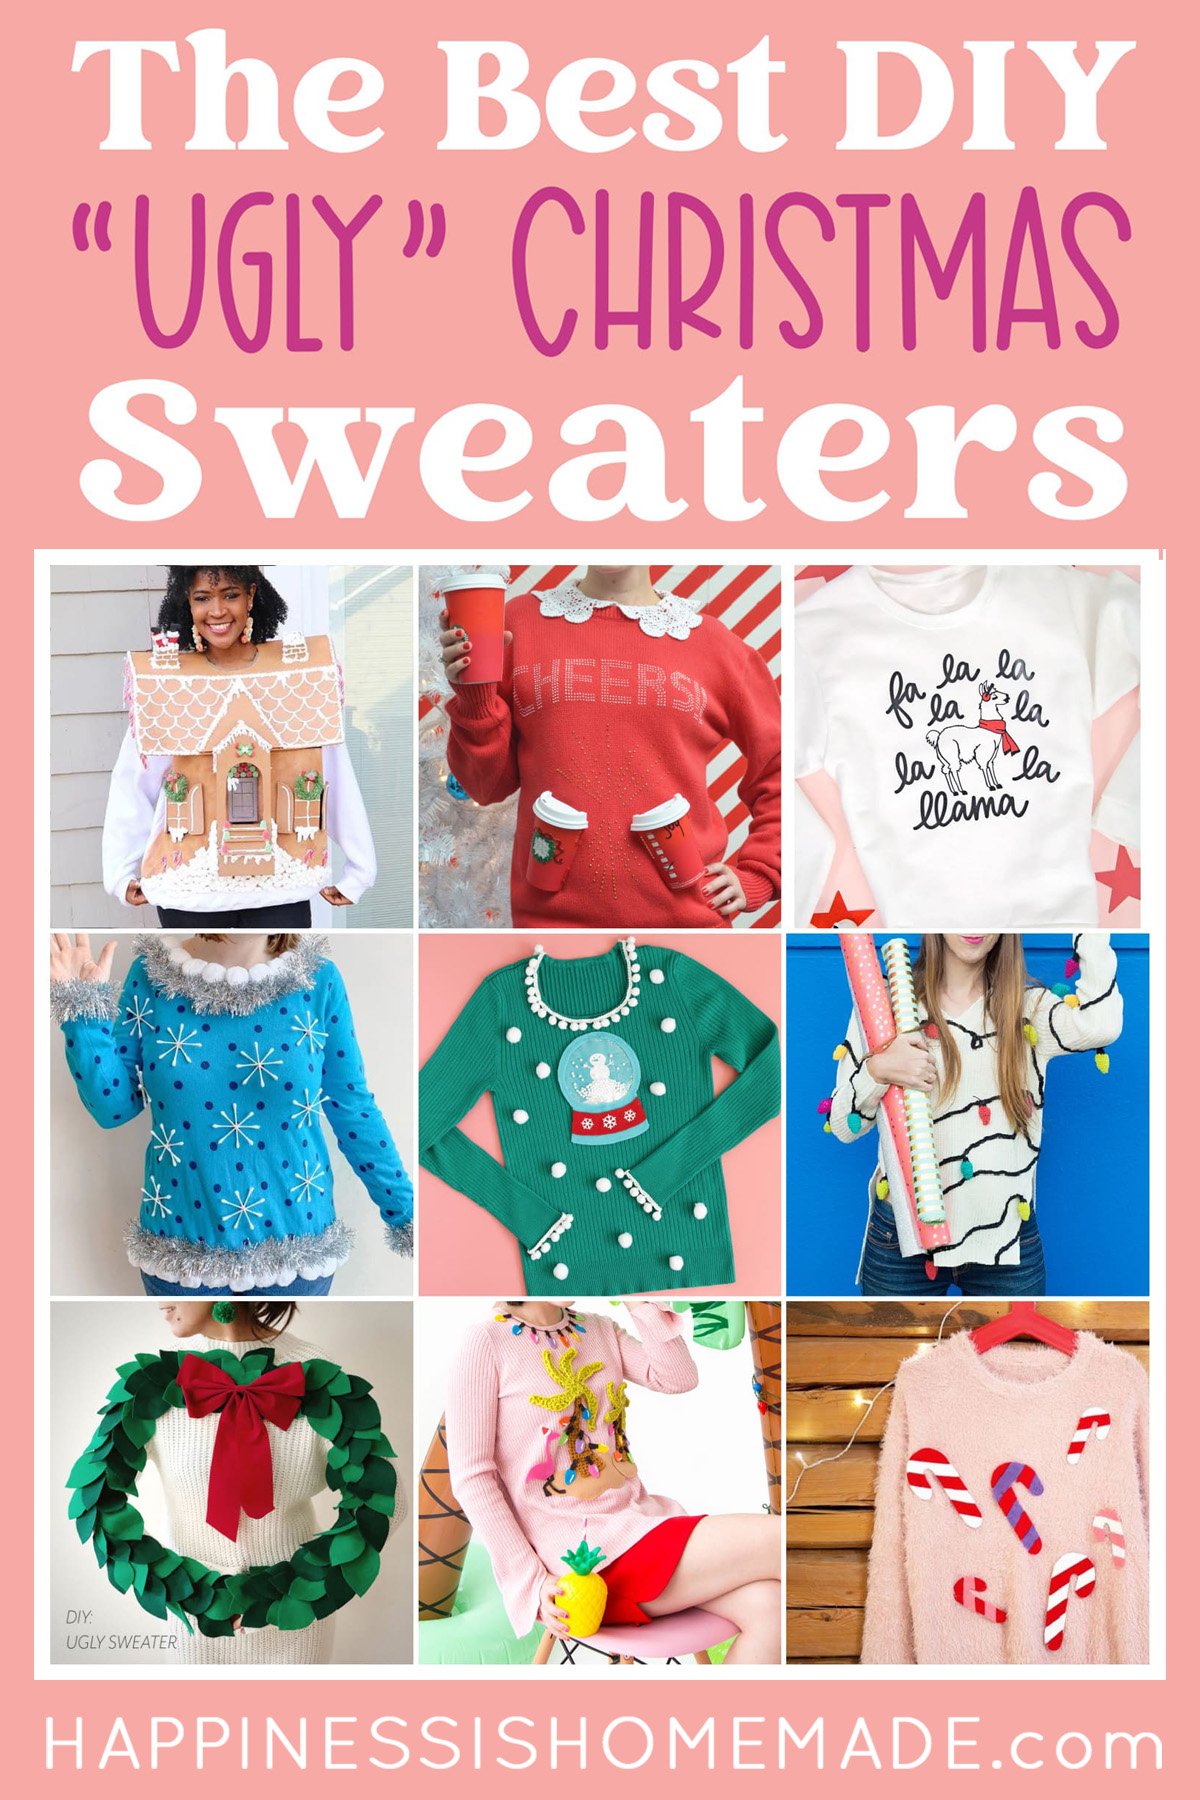 "The Best DIY 'Ugly' Christmas Sweaters" graphic with collage of DIY holiday sweater ideas